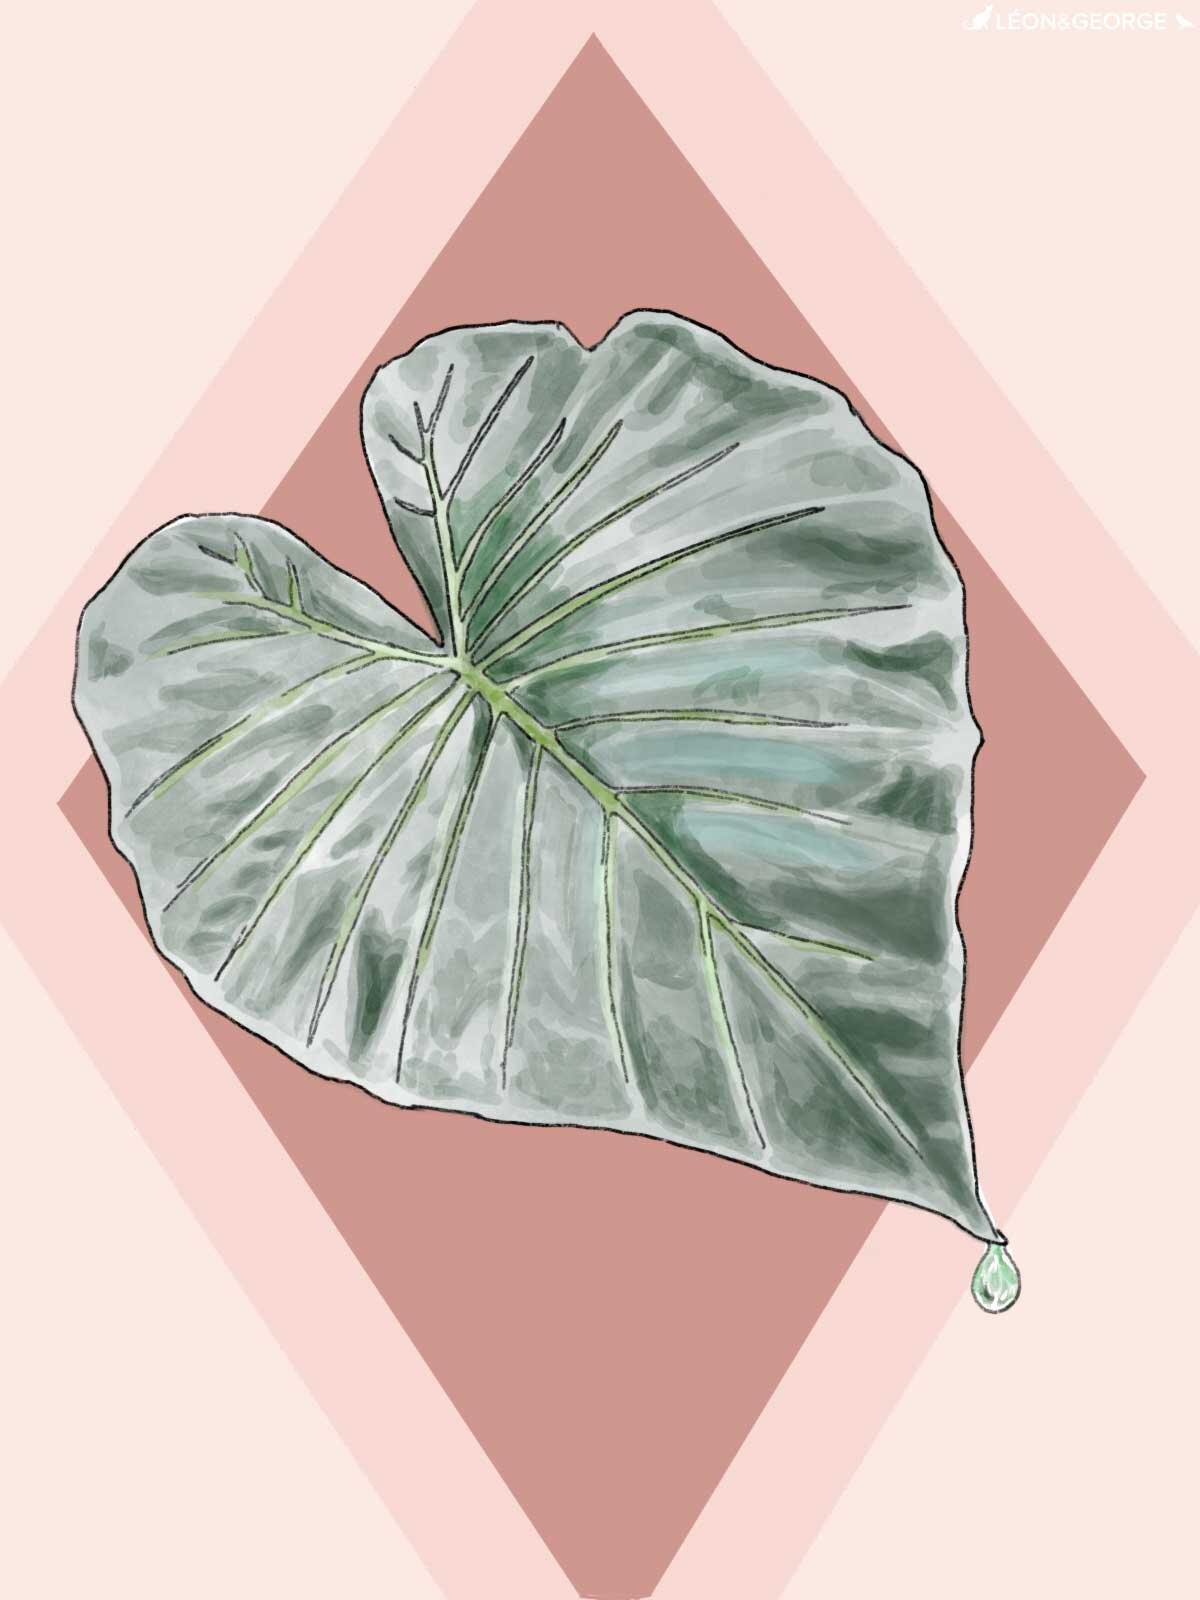 Would it be okay to use plant Velcro my Elephant Ear to stop the dropping?  : r/houseplants